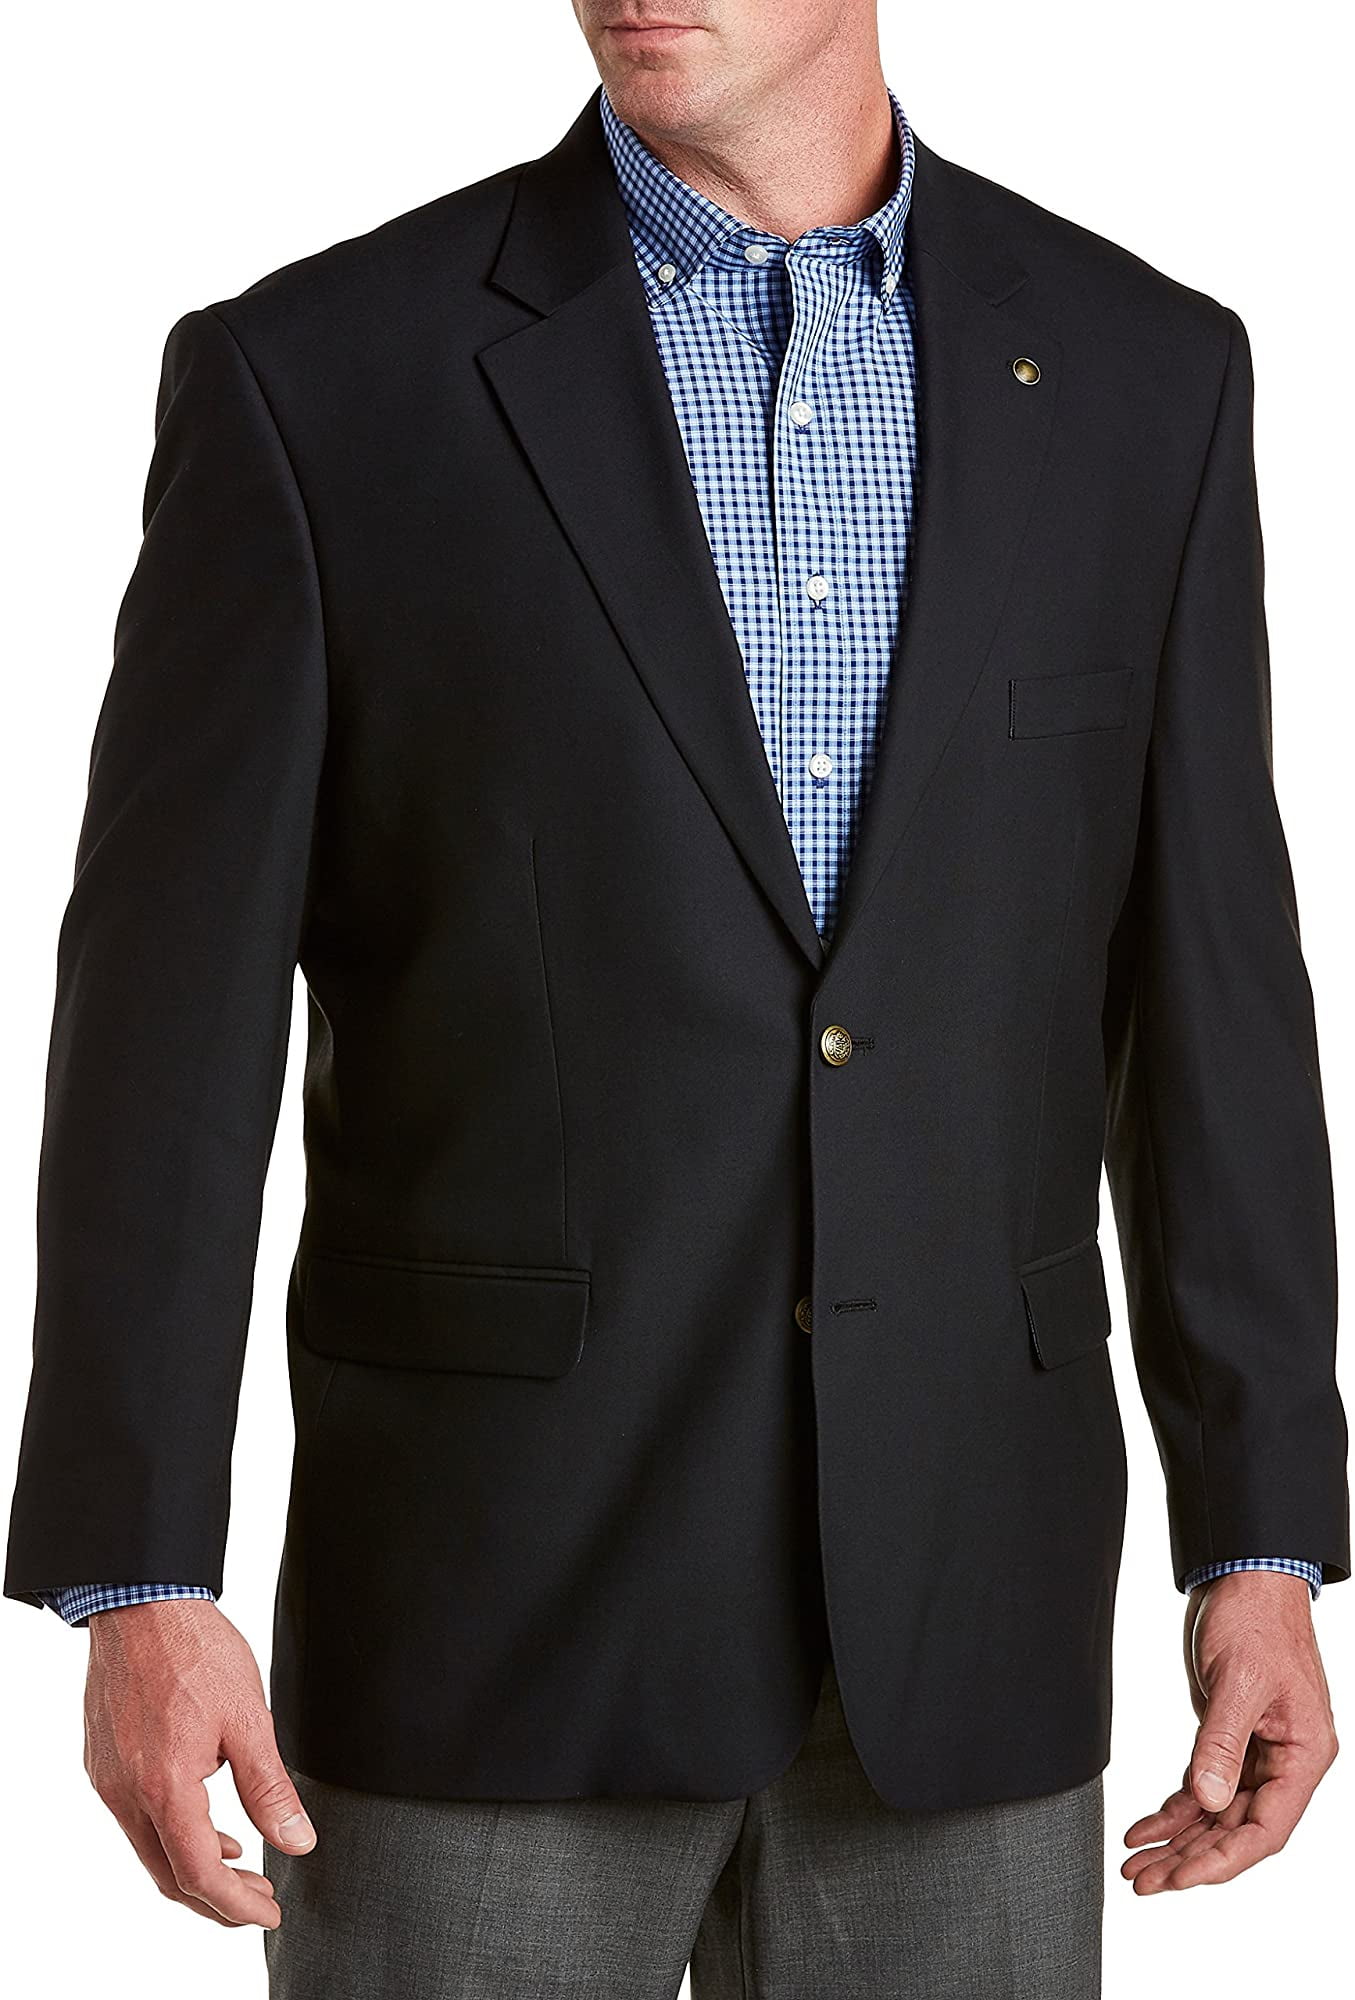 Gold Series by DXL Big and Tall Jacket-Relaxer Blazer -Executive Cut ...